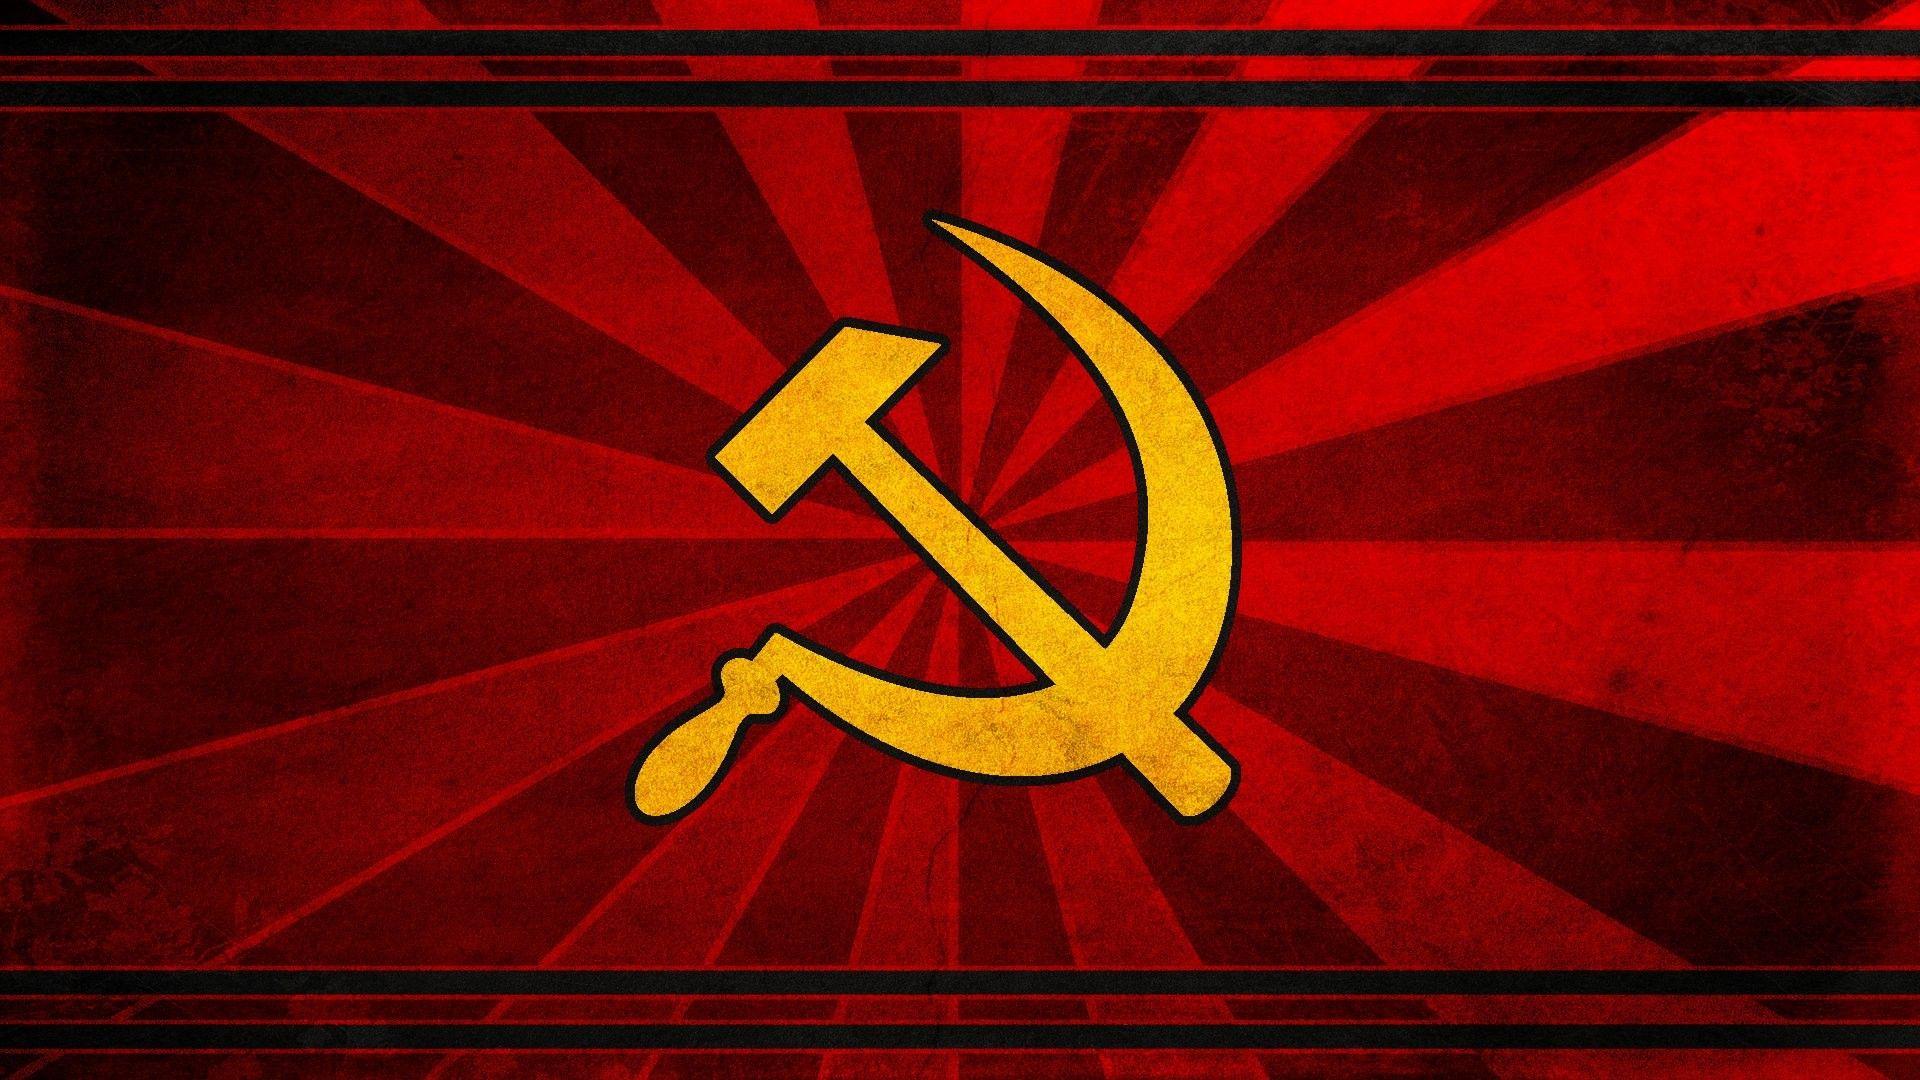 Russia Flag Wallpapers